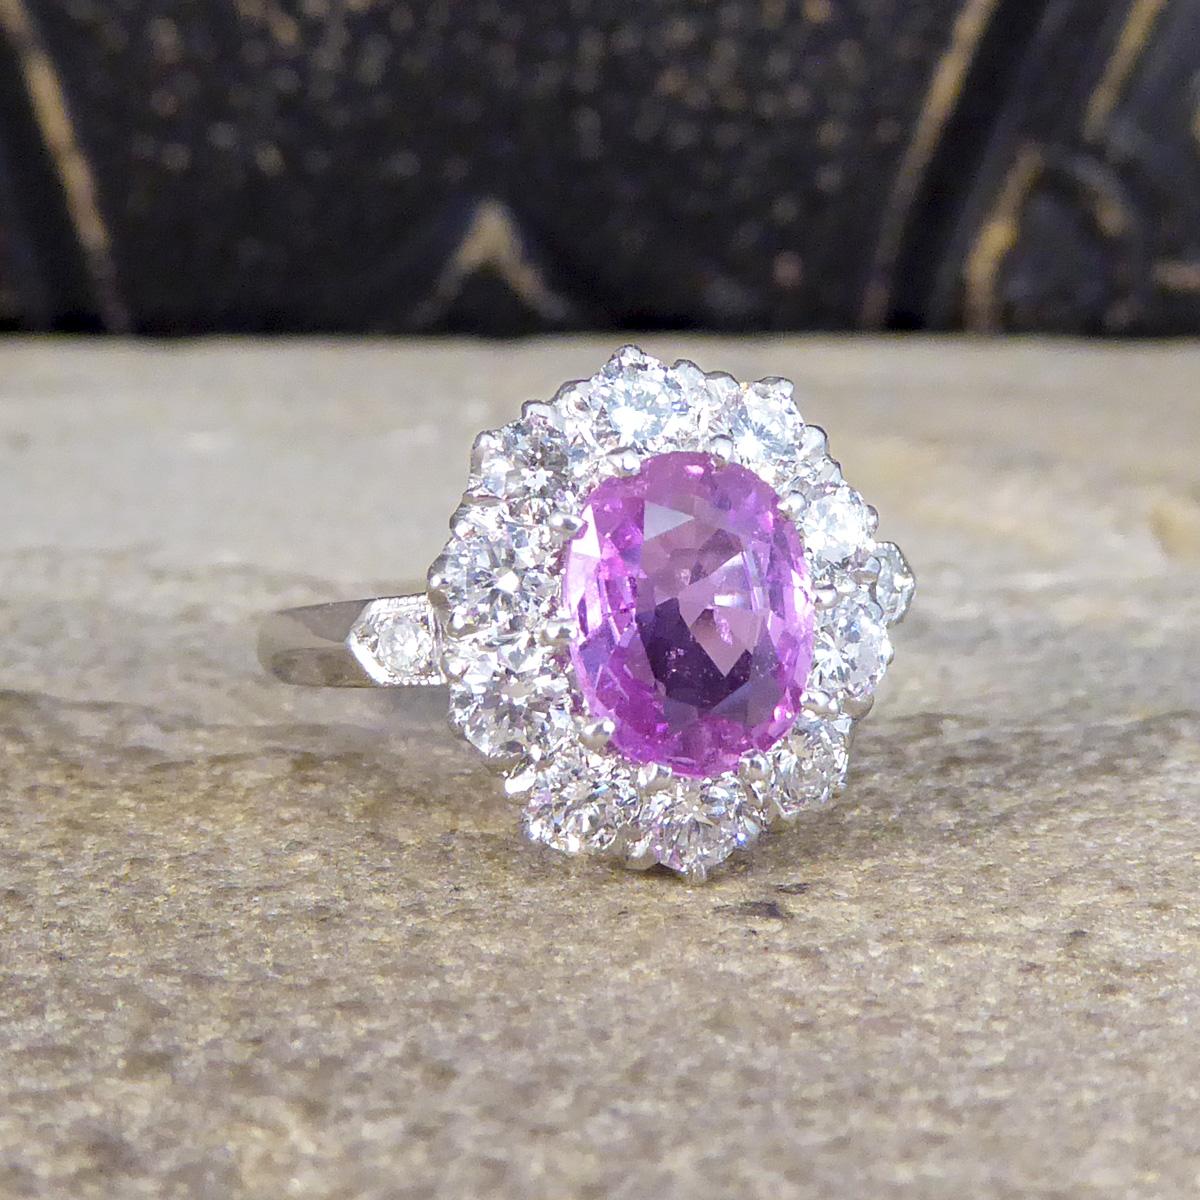 This contemporary ring has been crafted to resemble an Edwardian style ring. A 1.15ct stunning Pink Sapphire in the centre of the ring and surrounded by a halo of 10 Brilliant Cut Diamonds weighing a grand total of 1.00ct giving it a brilliant